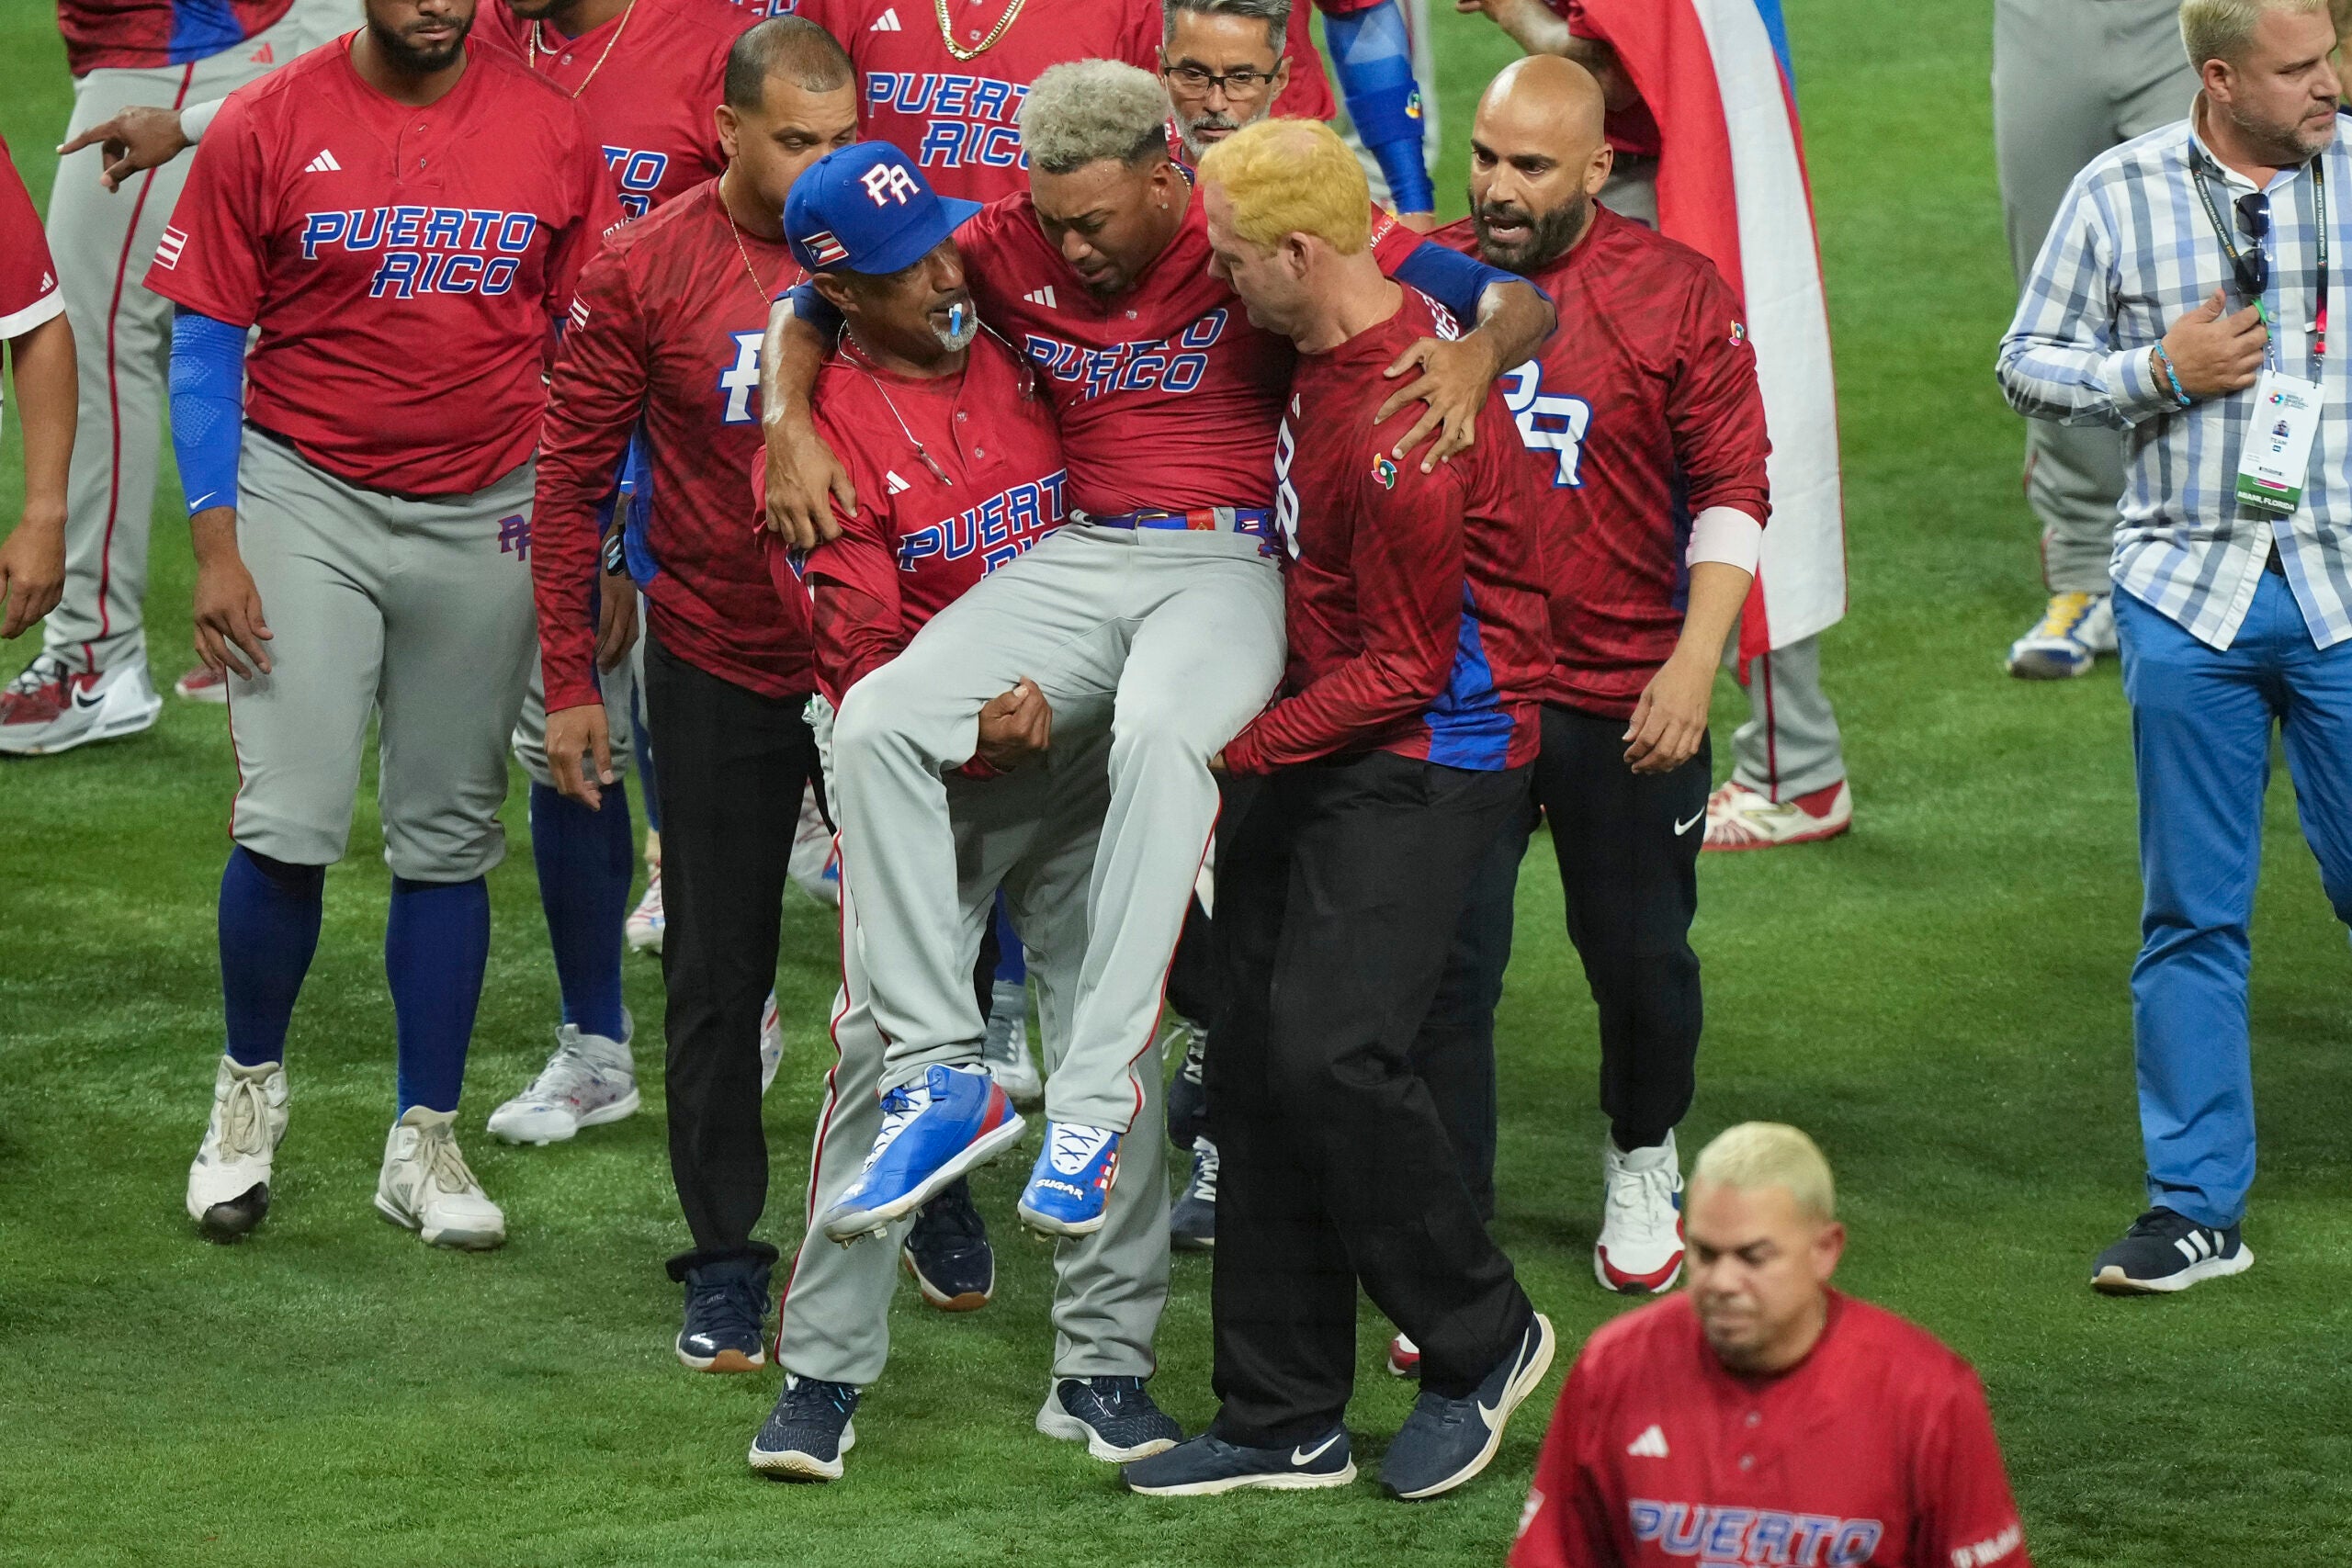 Edwin Diaz is carried off the field after suffering an injury following Puerto Rico's win in the World Baseball Classic.